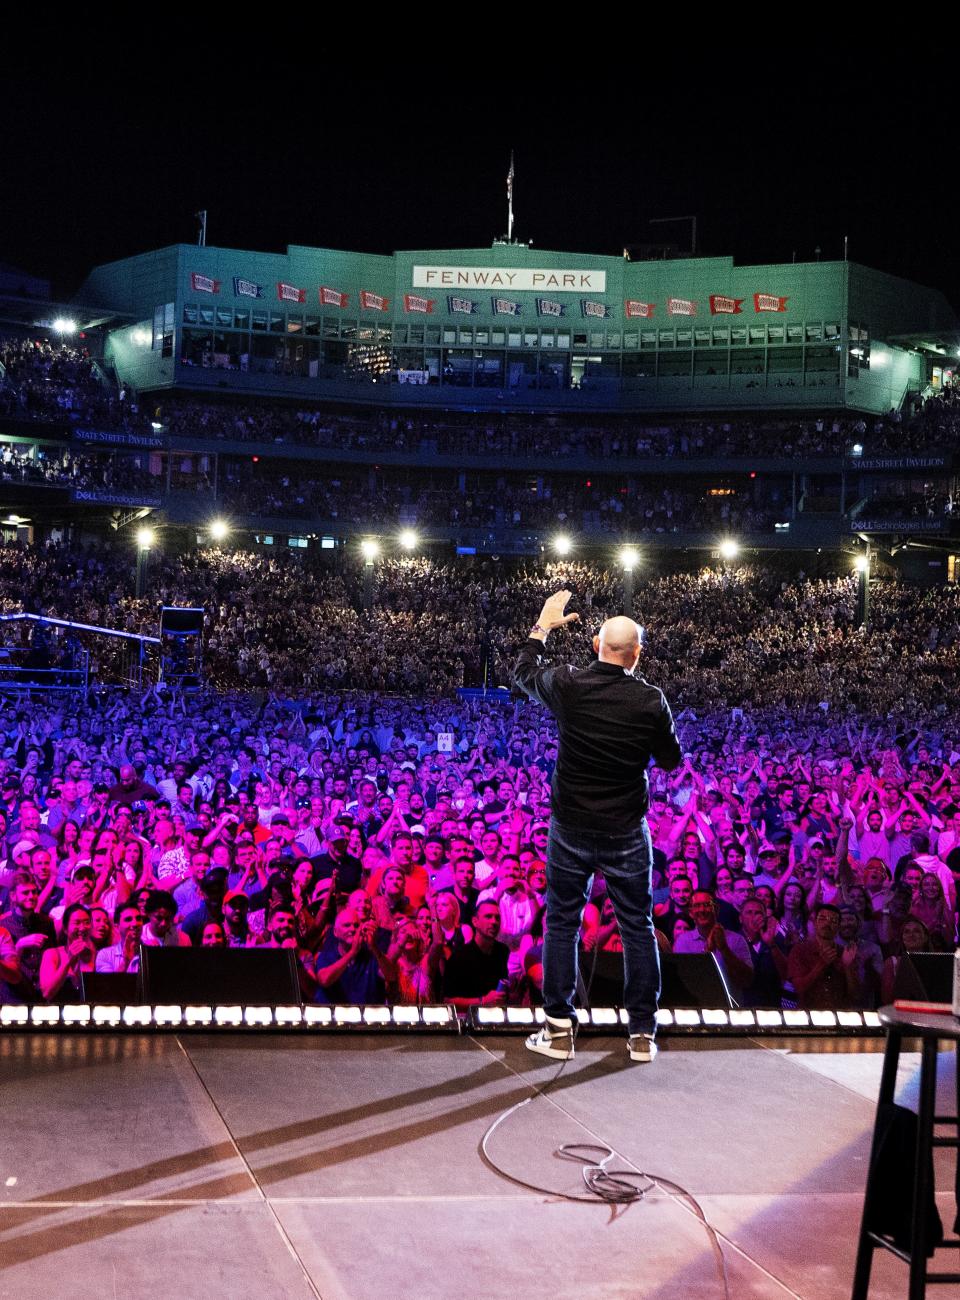 Comedian Bill Burr recently sold out Boston's 35,000-seat Fenway Park.